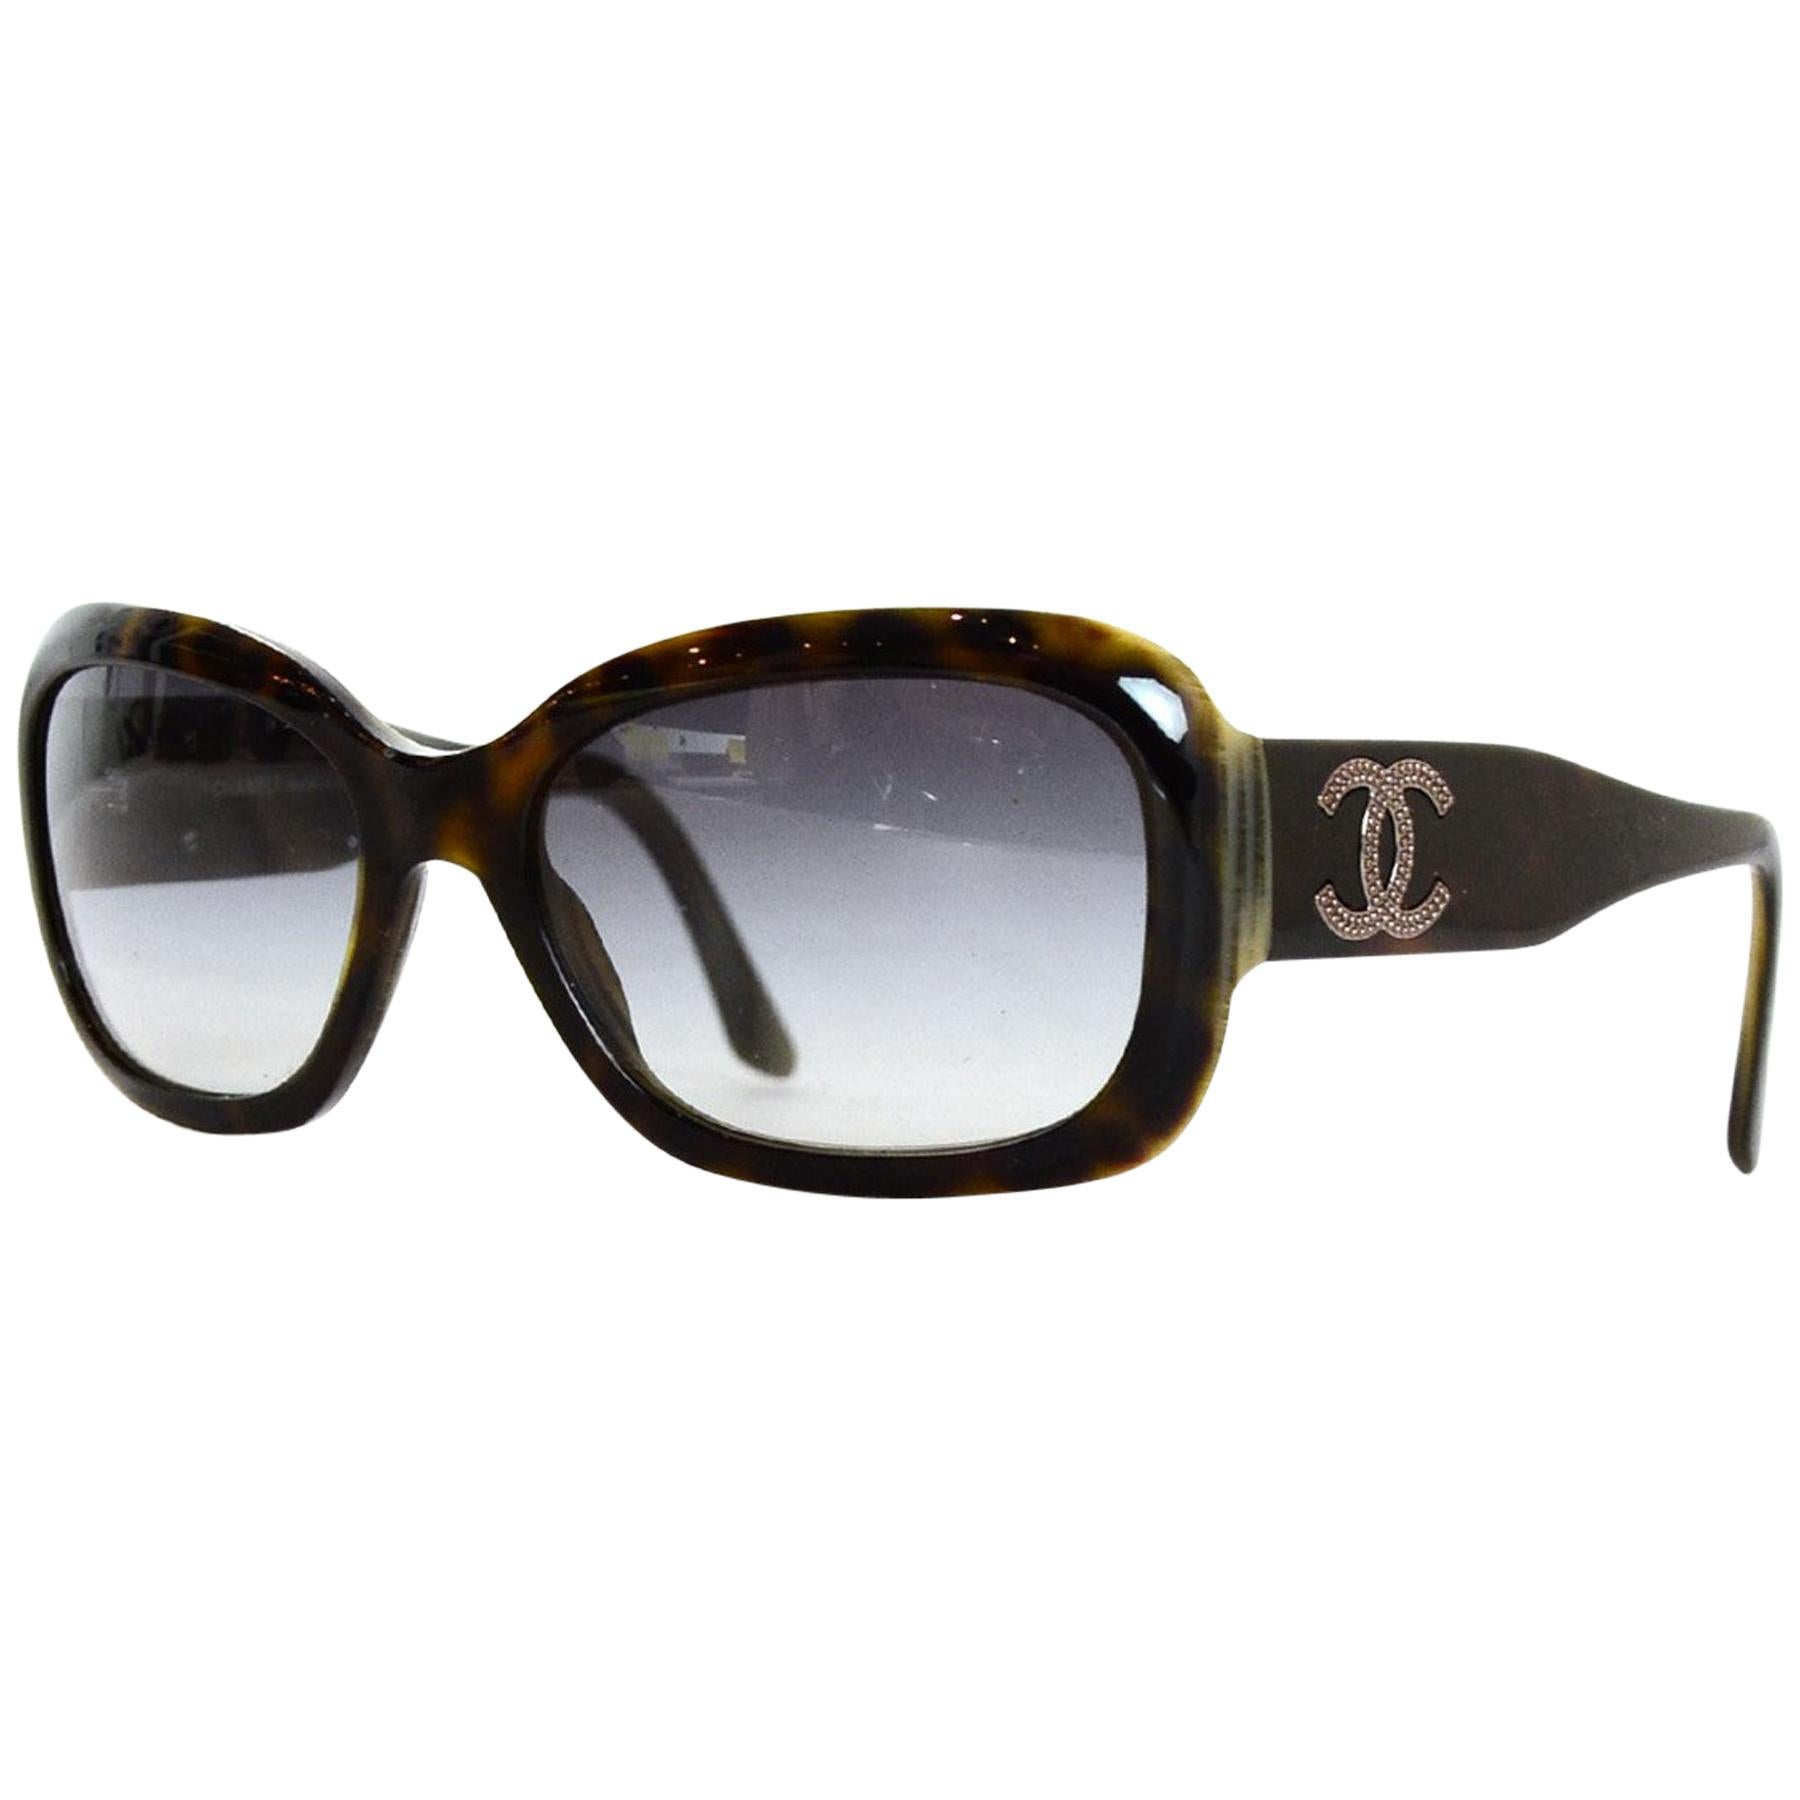 Chanel Tortoise Resin Sunglasses W/ CC On Arms & Case